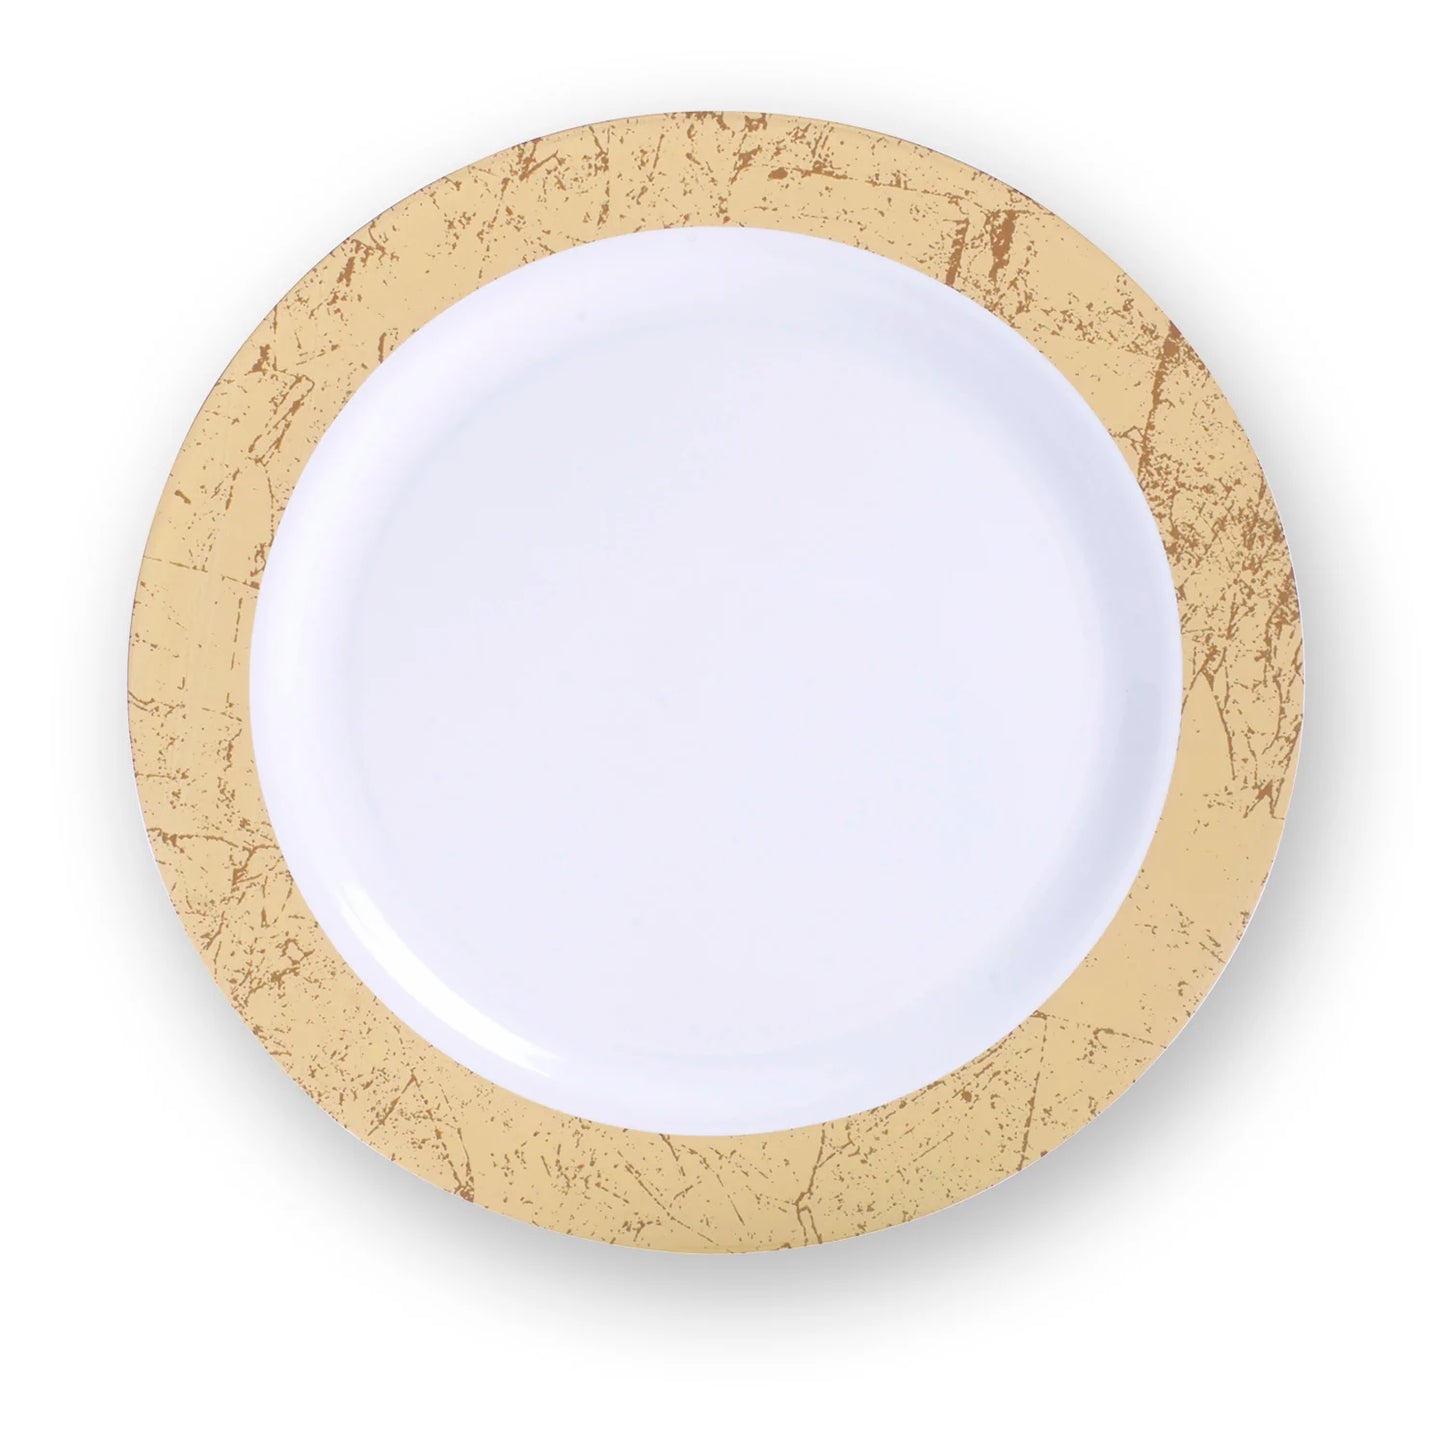 300-piece Gold Dinnerware Set for 50 guests Includes: 100 gold marble design plastic plates & 50 pre-wrapped gold silverware sets